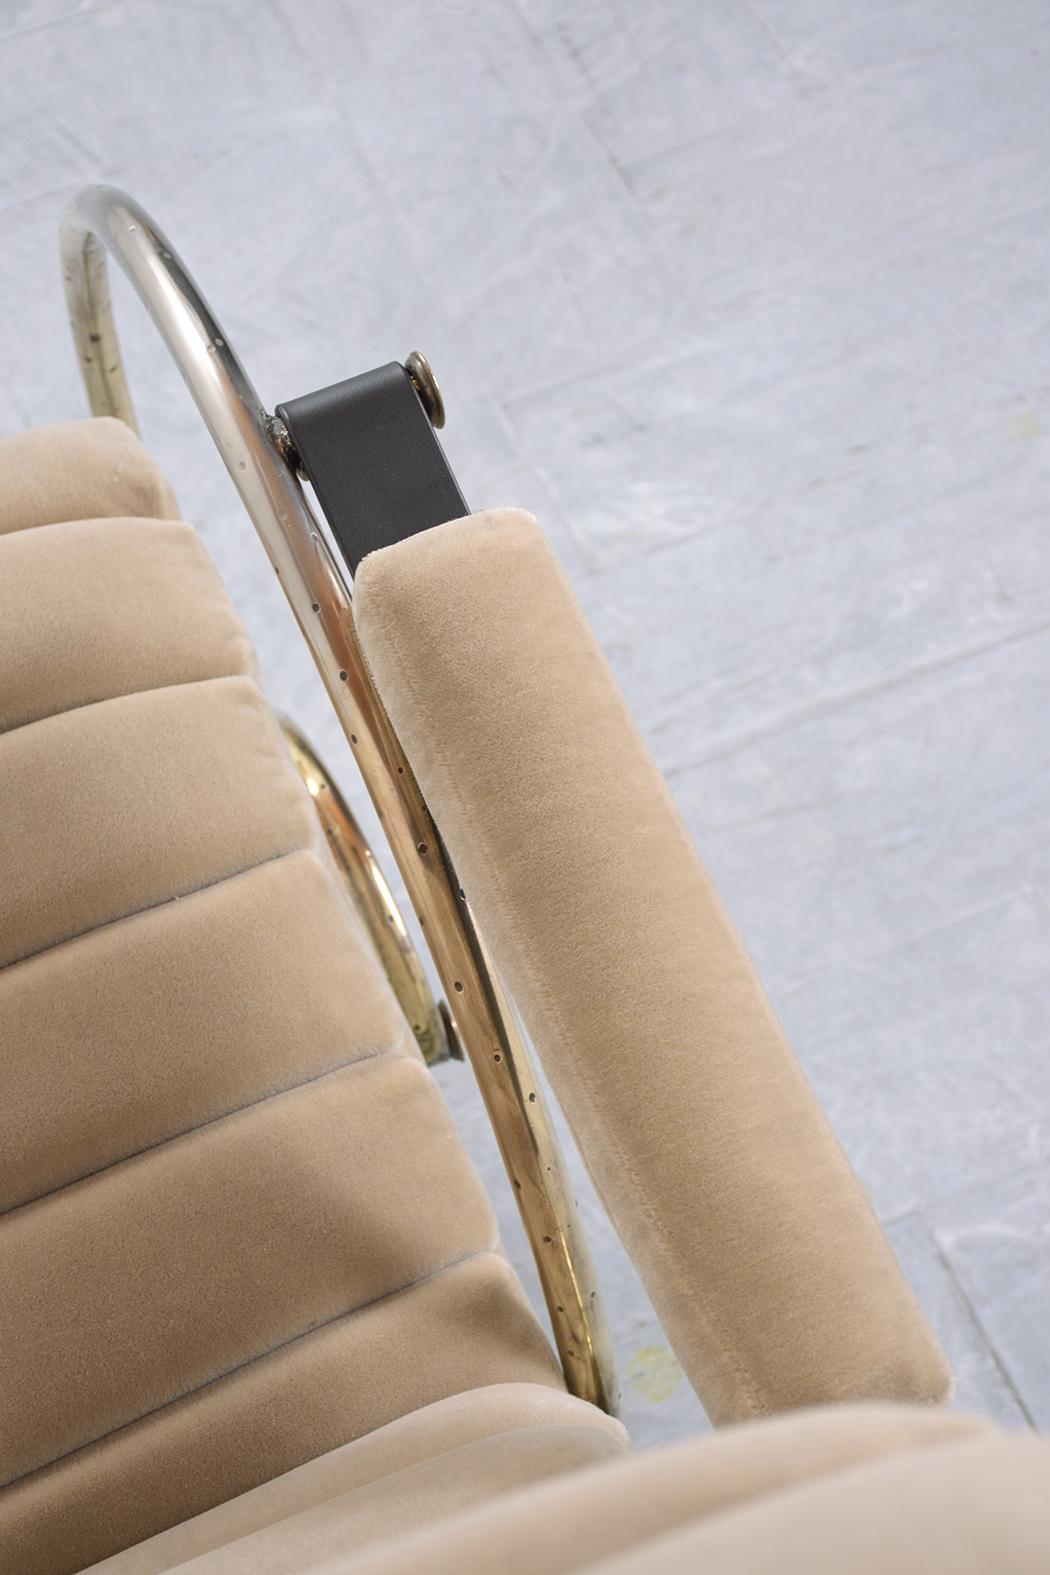 English Mid-Century Modern Brass Rocking Chair with Wood Details & Mohair Fabric